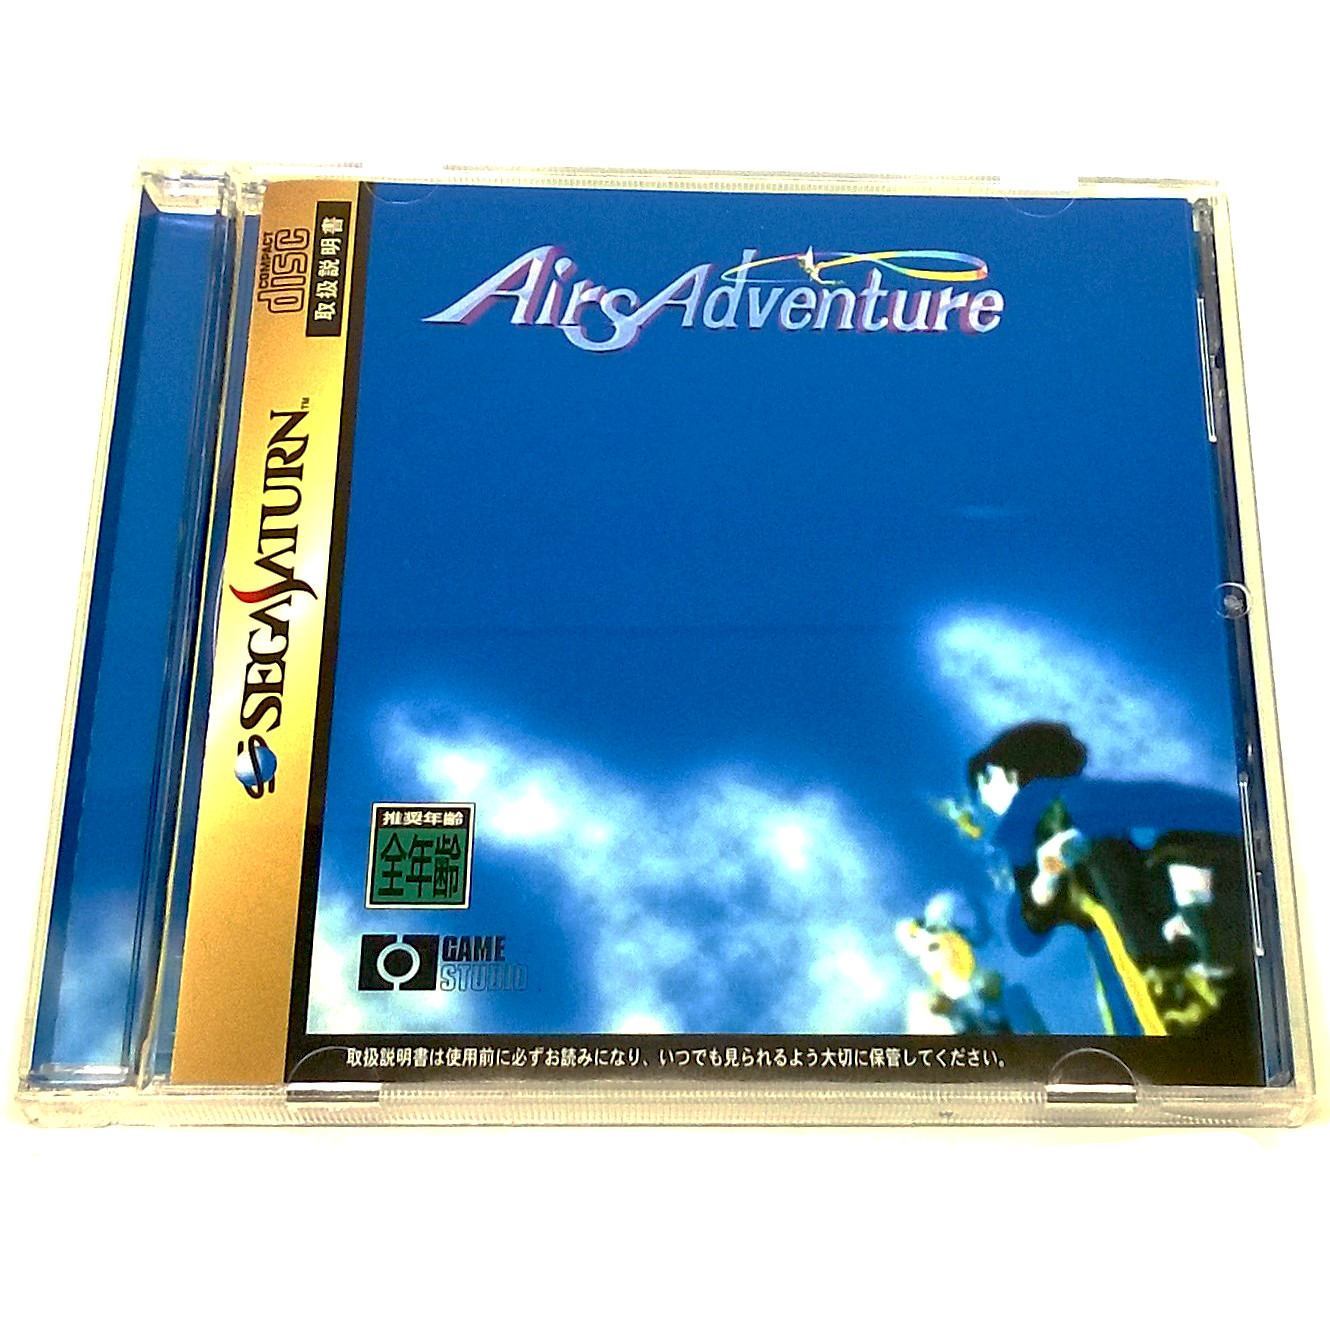 Airs Adventure for Saturn (import) - Front of case